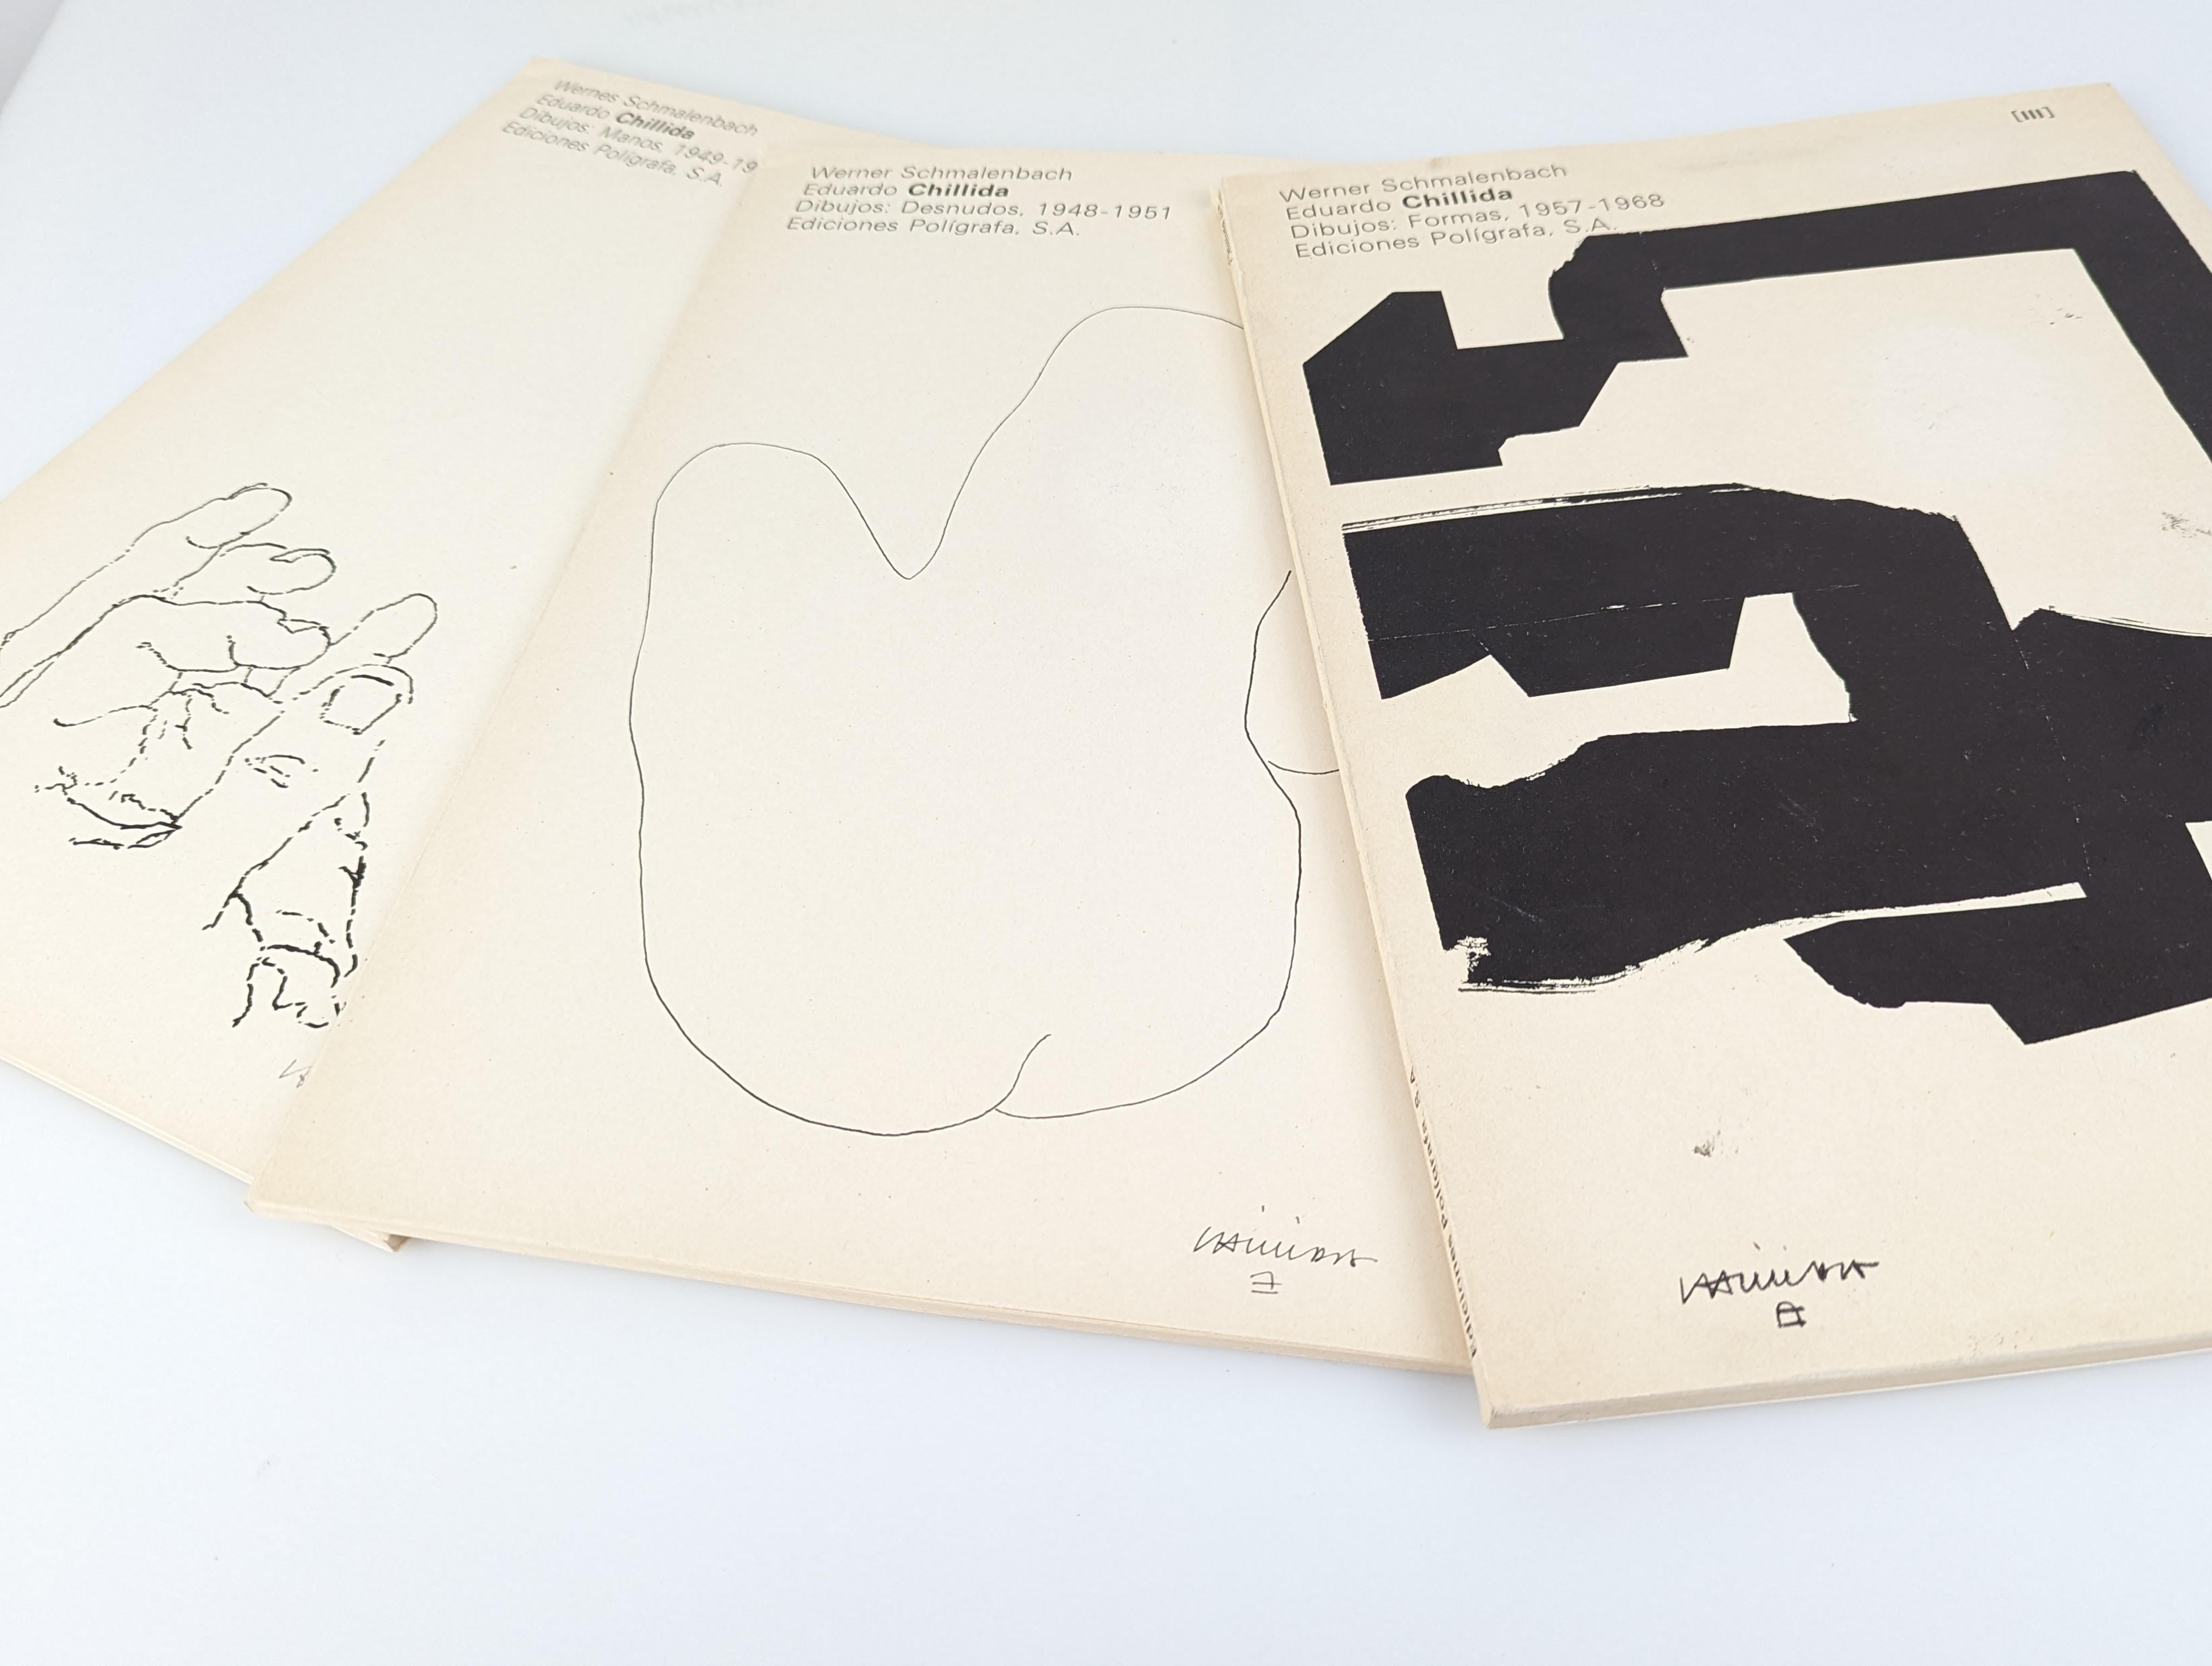 Excellent work by the great and world-renowned art historian Werner Schmalenbach on the work of Eduardo Chillida, selected in fantastic 3 Volumes. Also includes the original protective sleeve which shows damage to the top of the paper. The condition